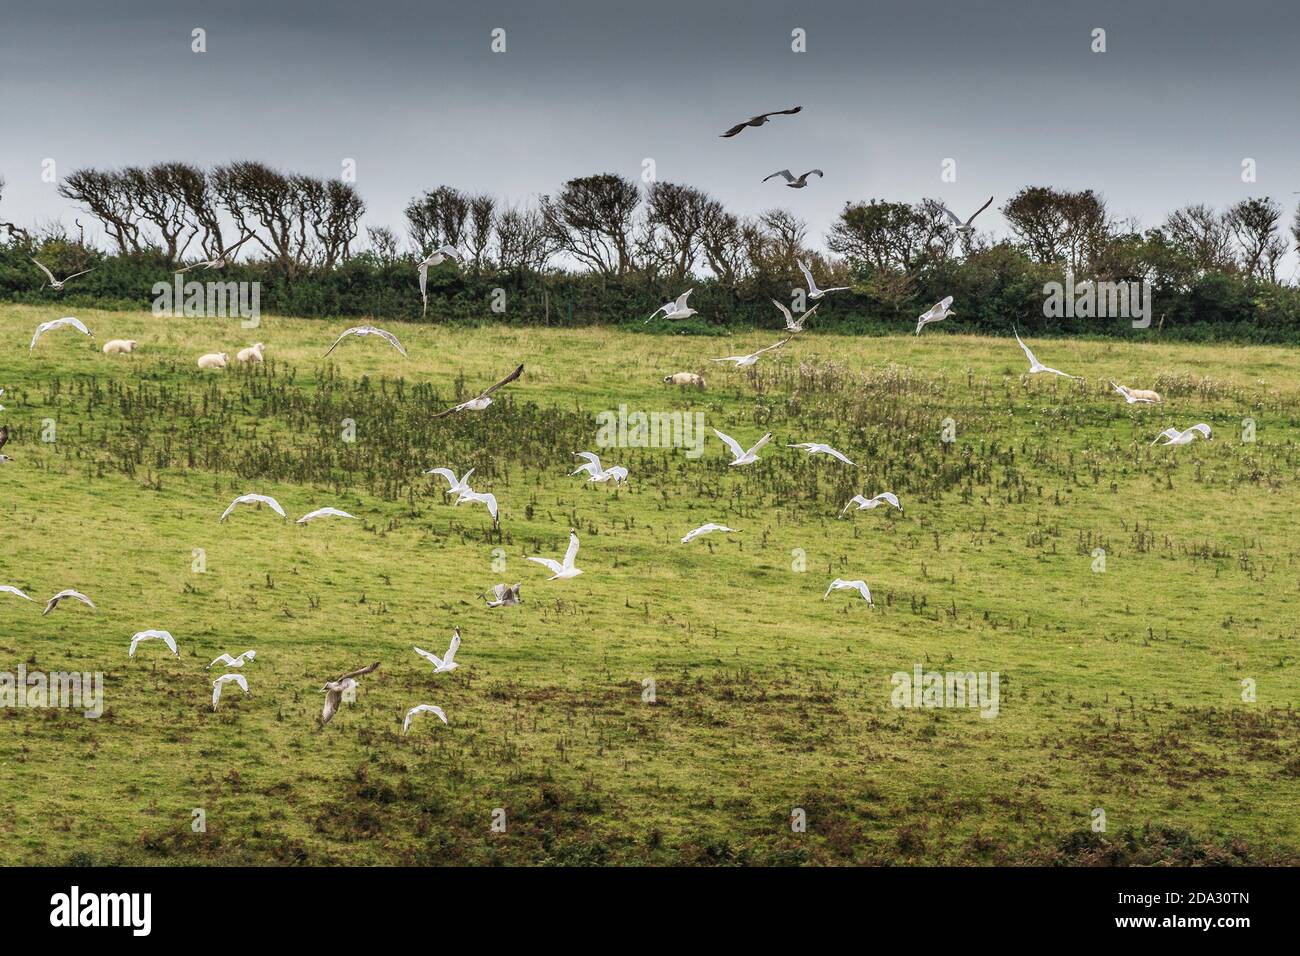 A flock of European Herring Gulls flying over a field in Newquay in Cornwall. Stock Photo